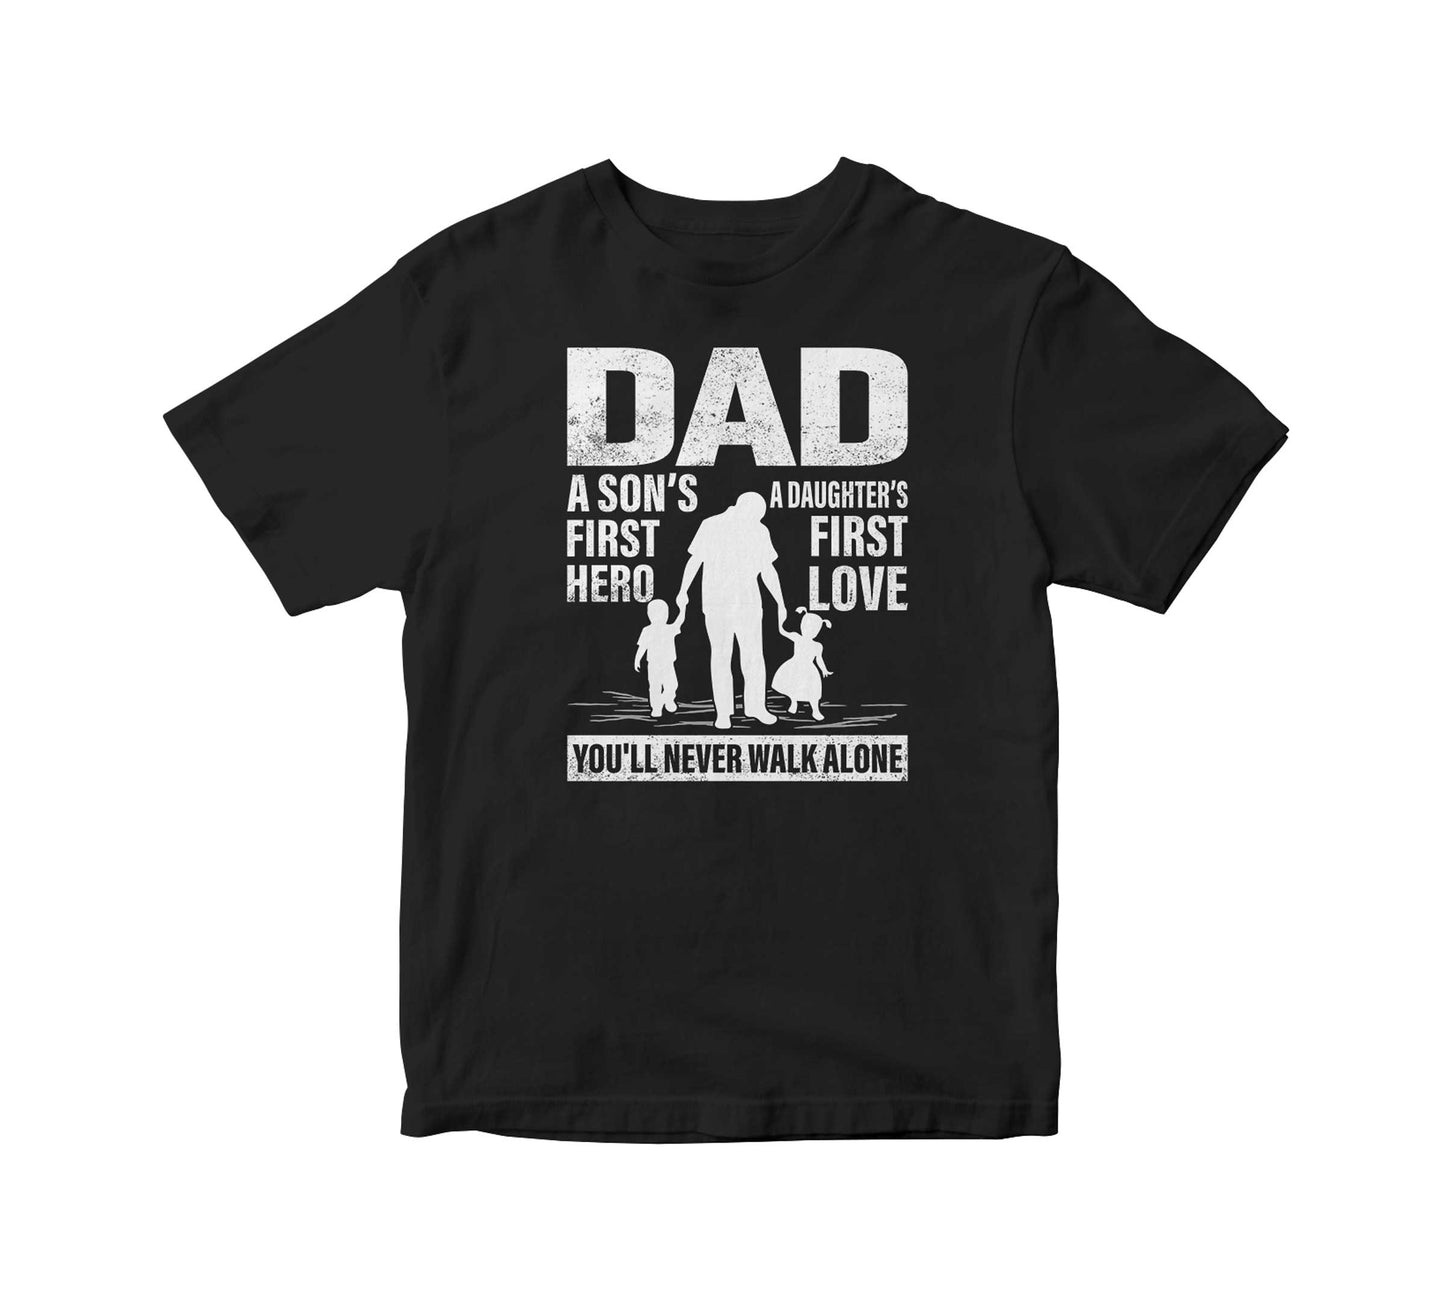 Dad First Hero First Love Adult Unisex T-Shirt